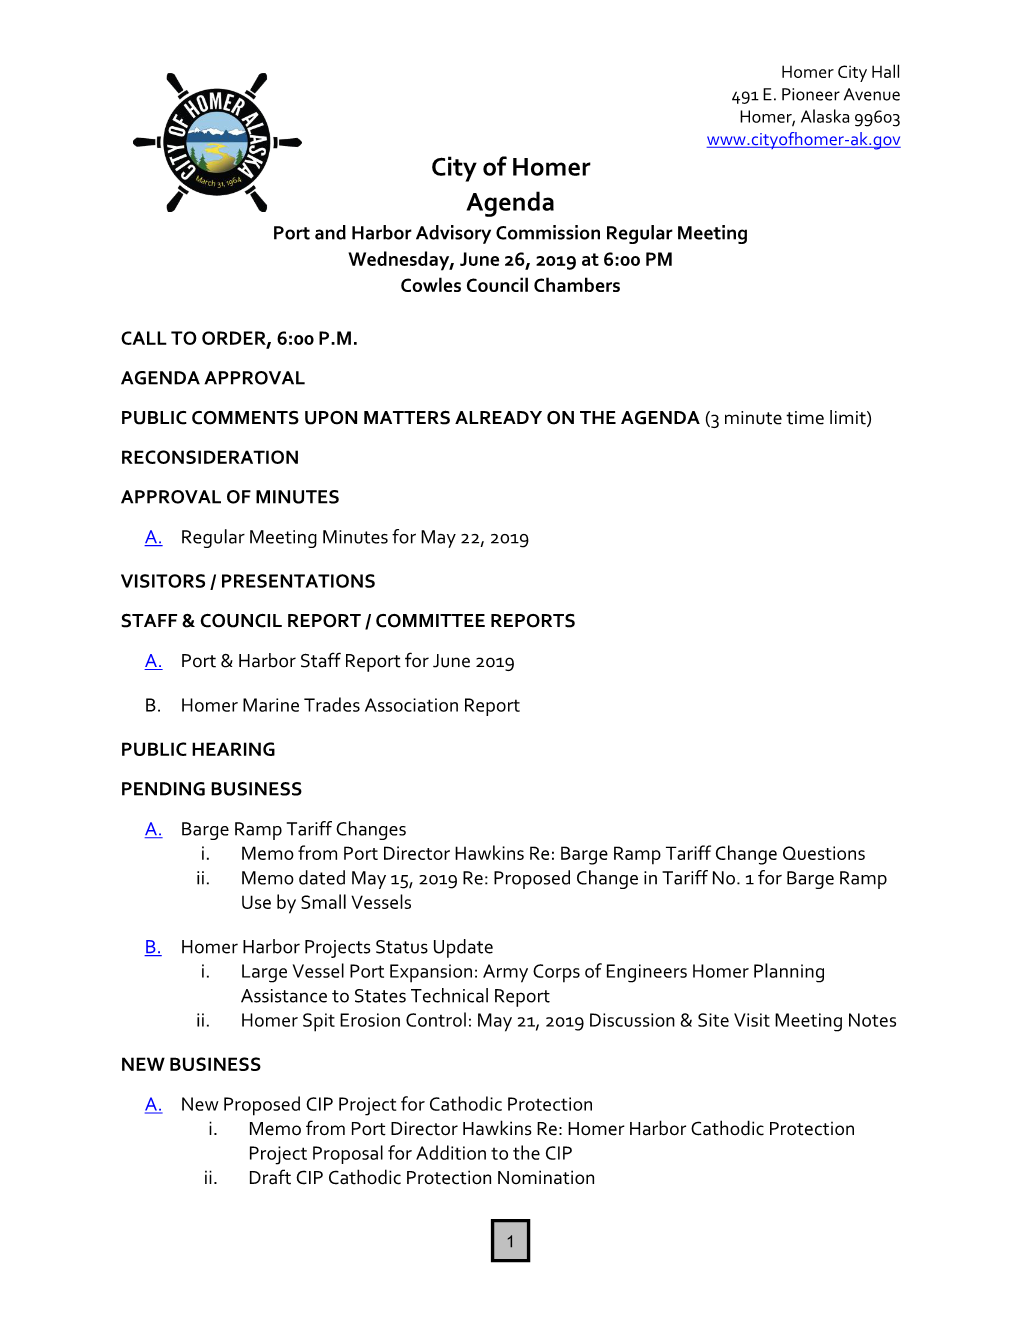 City of Homer Agenda Port and Harbor Advisory Commission Regular Meeting Wednesday, June 26, 2019 at 6:00 PM Cowles Council Chambers